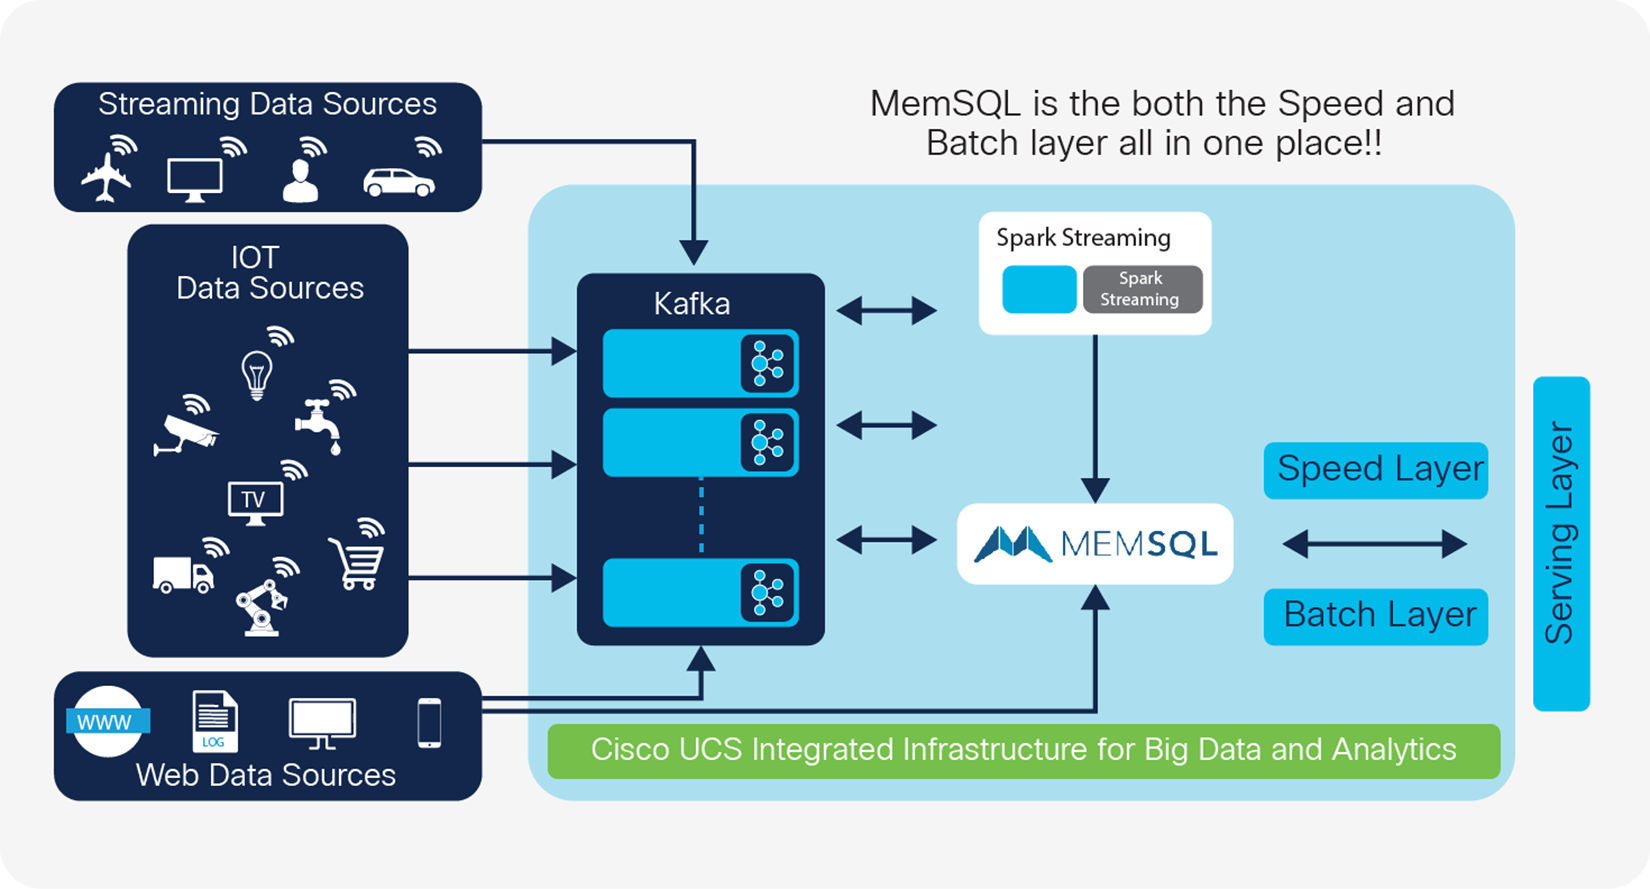 Cisco UCS Integrated Infrastructure for Big Data and Analytics with MemSQL Solution Architecture